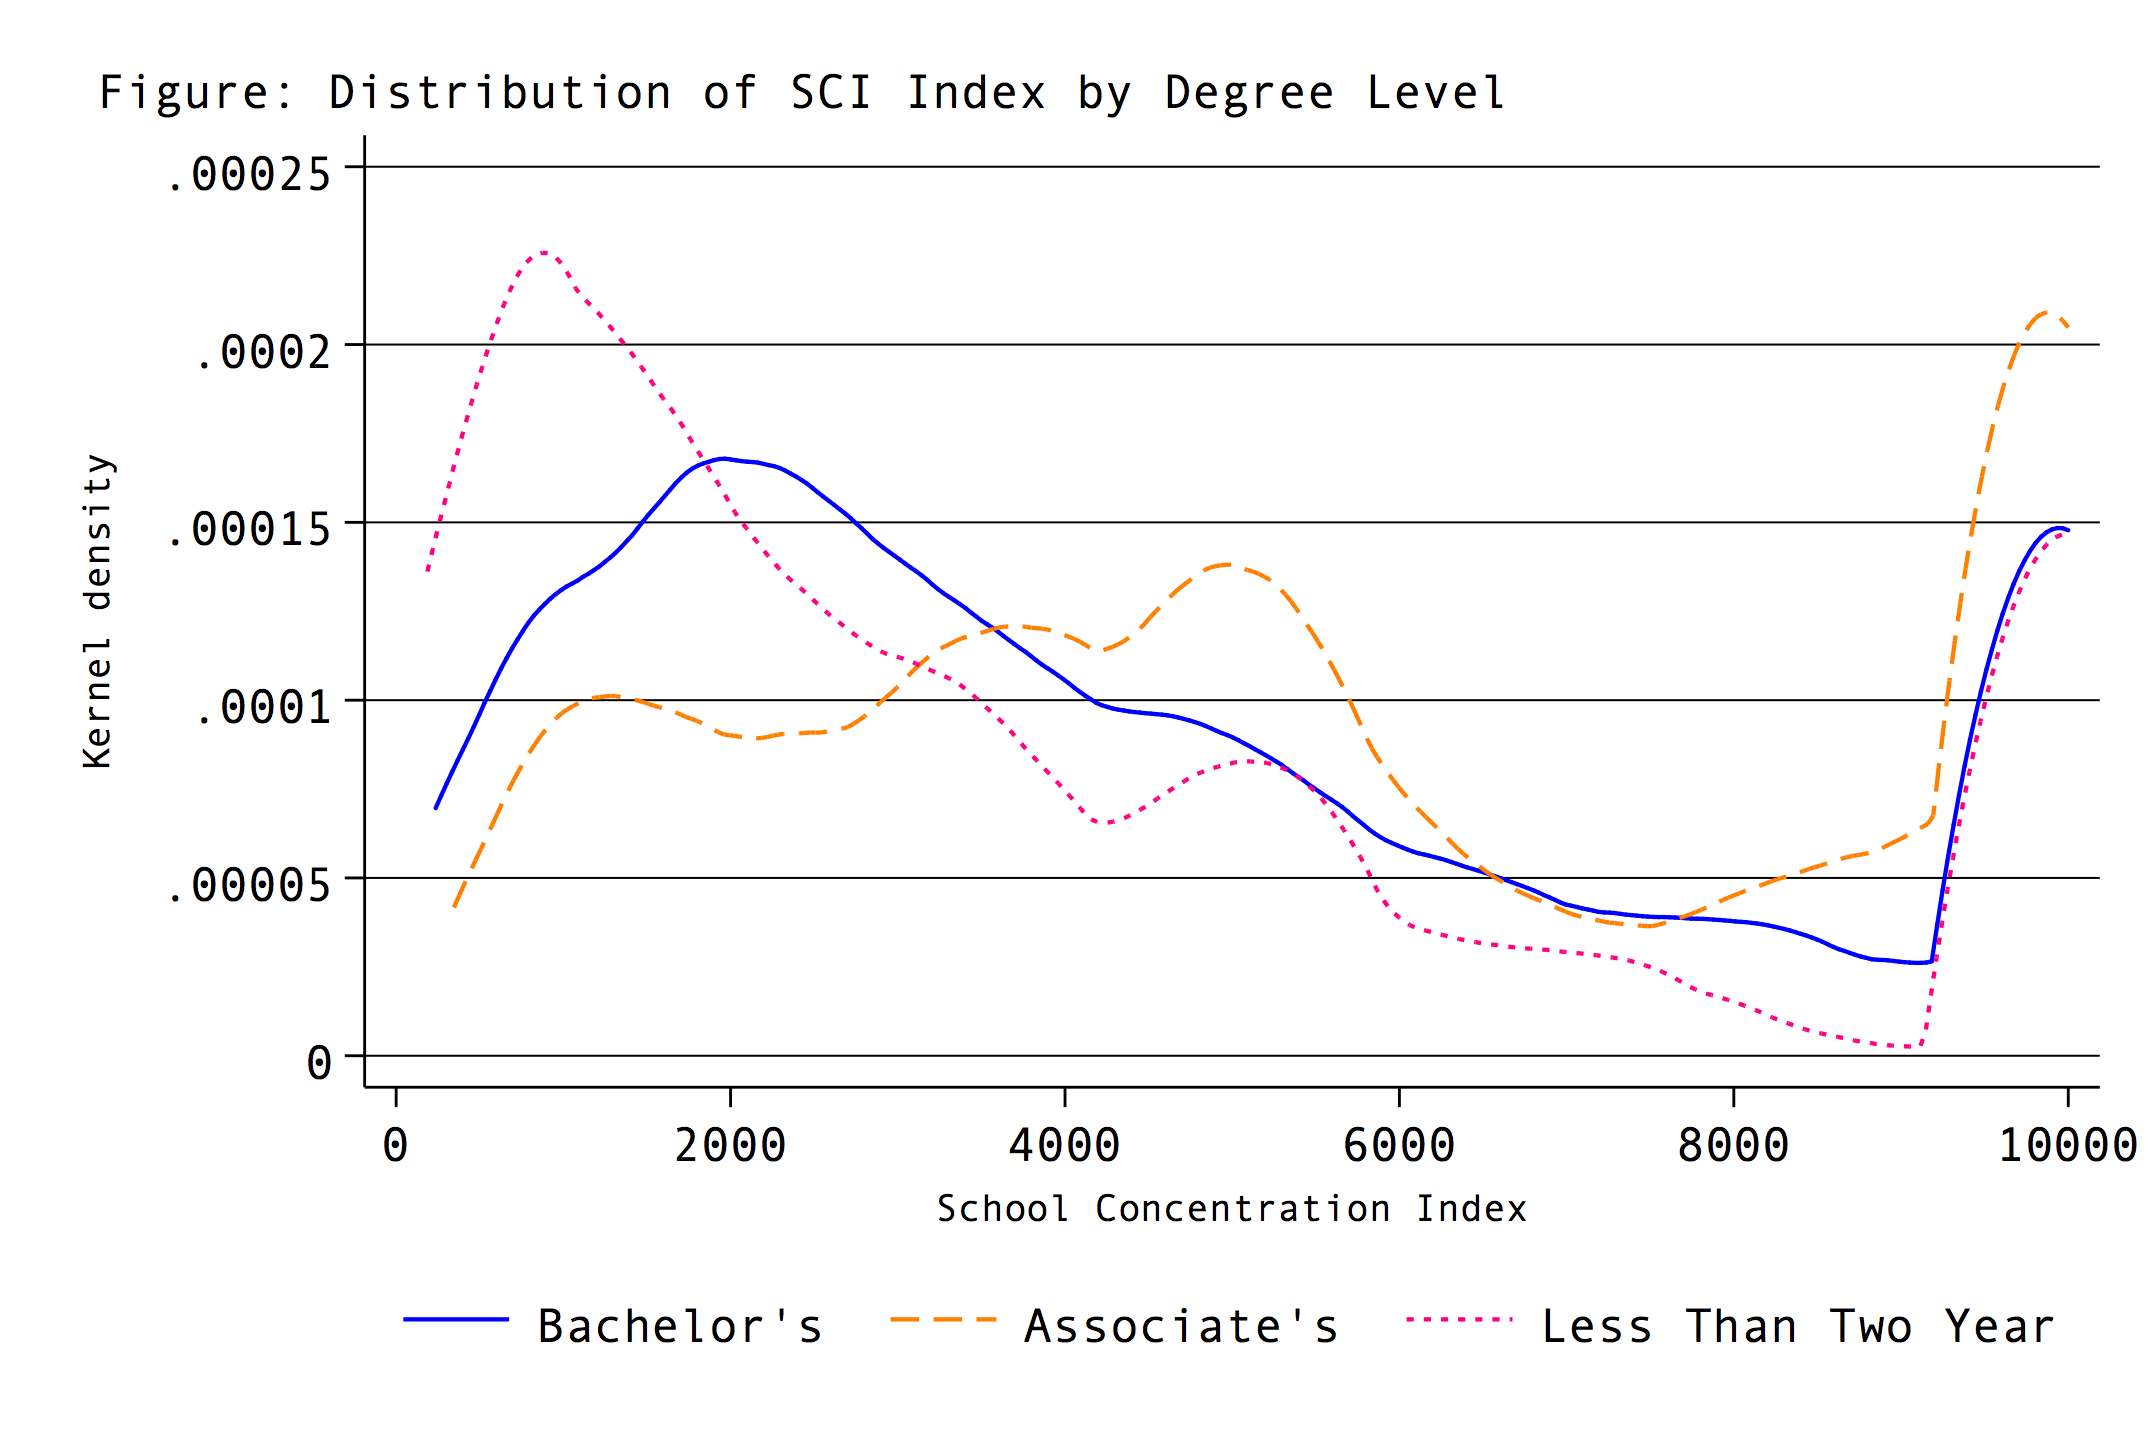 Extremely right-skewed SCI density curves across all institution levels.